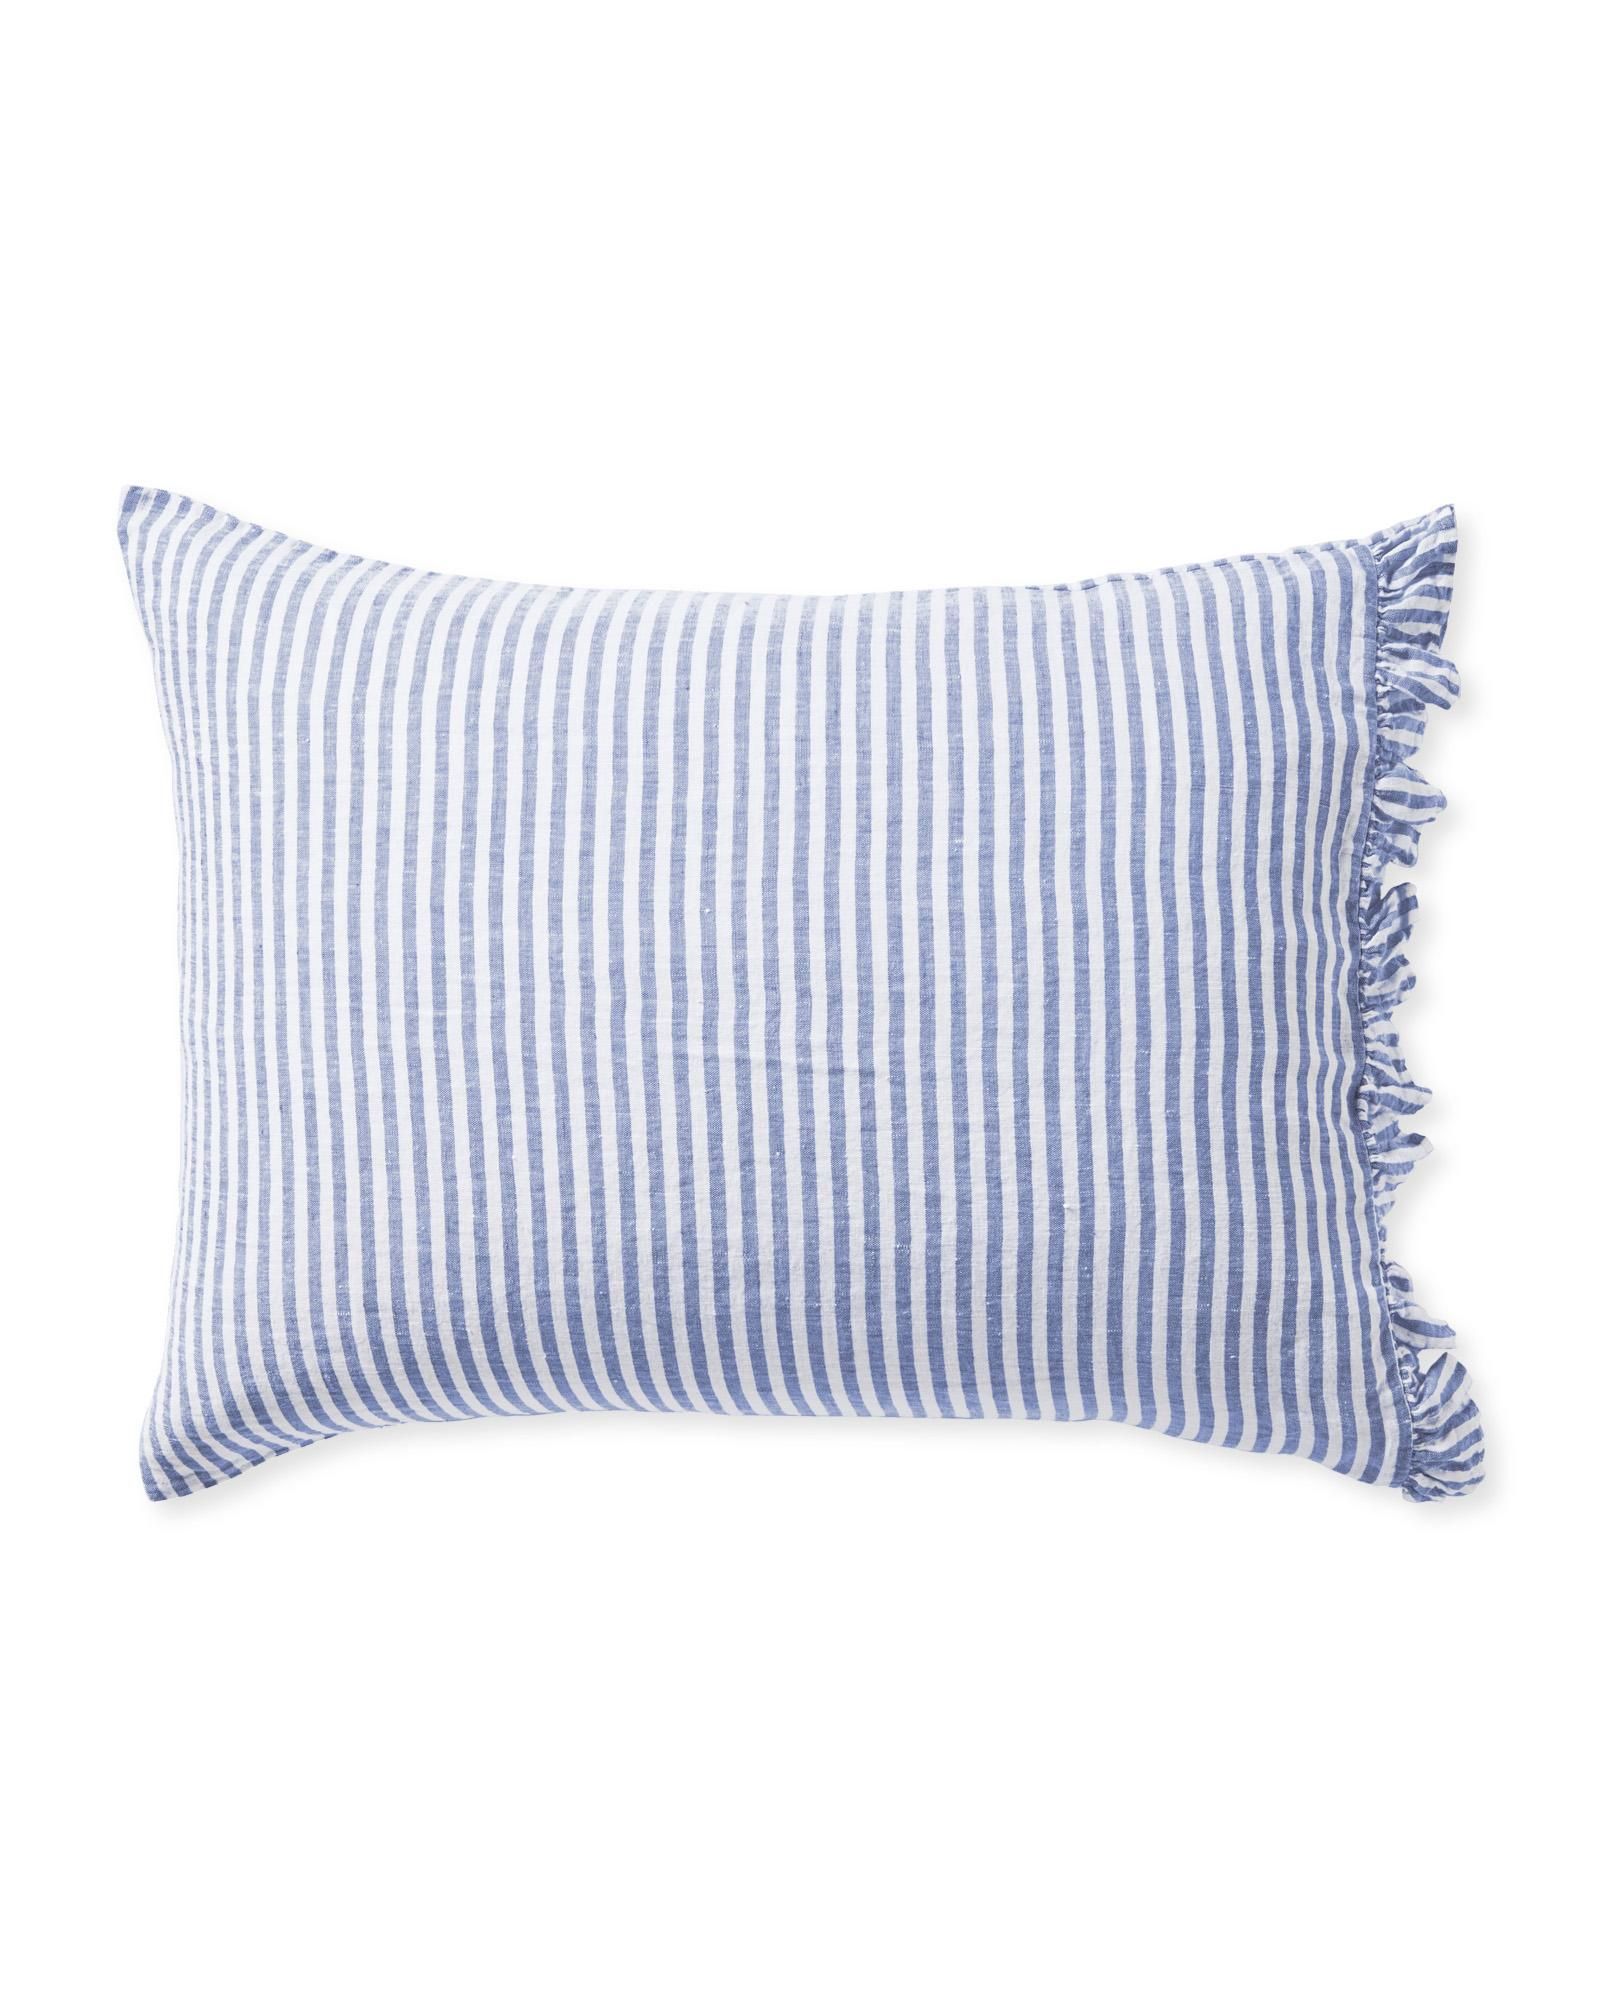 Nantucket Stripe Linen  Pillowcases (Set of 2) | Serena and Lily